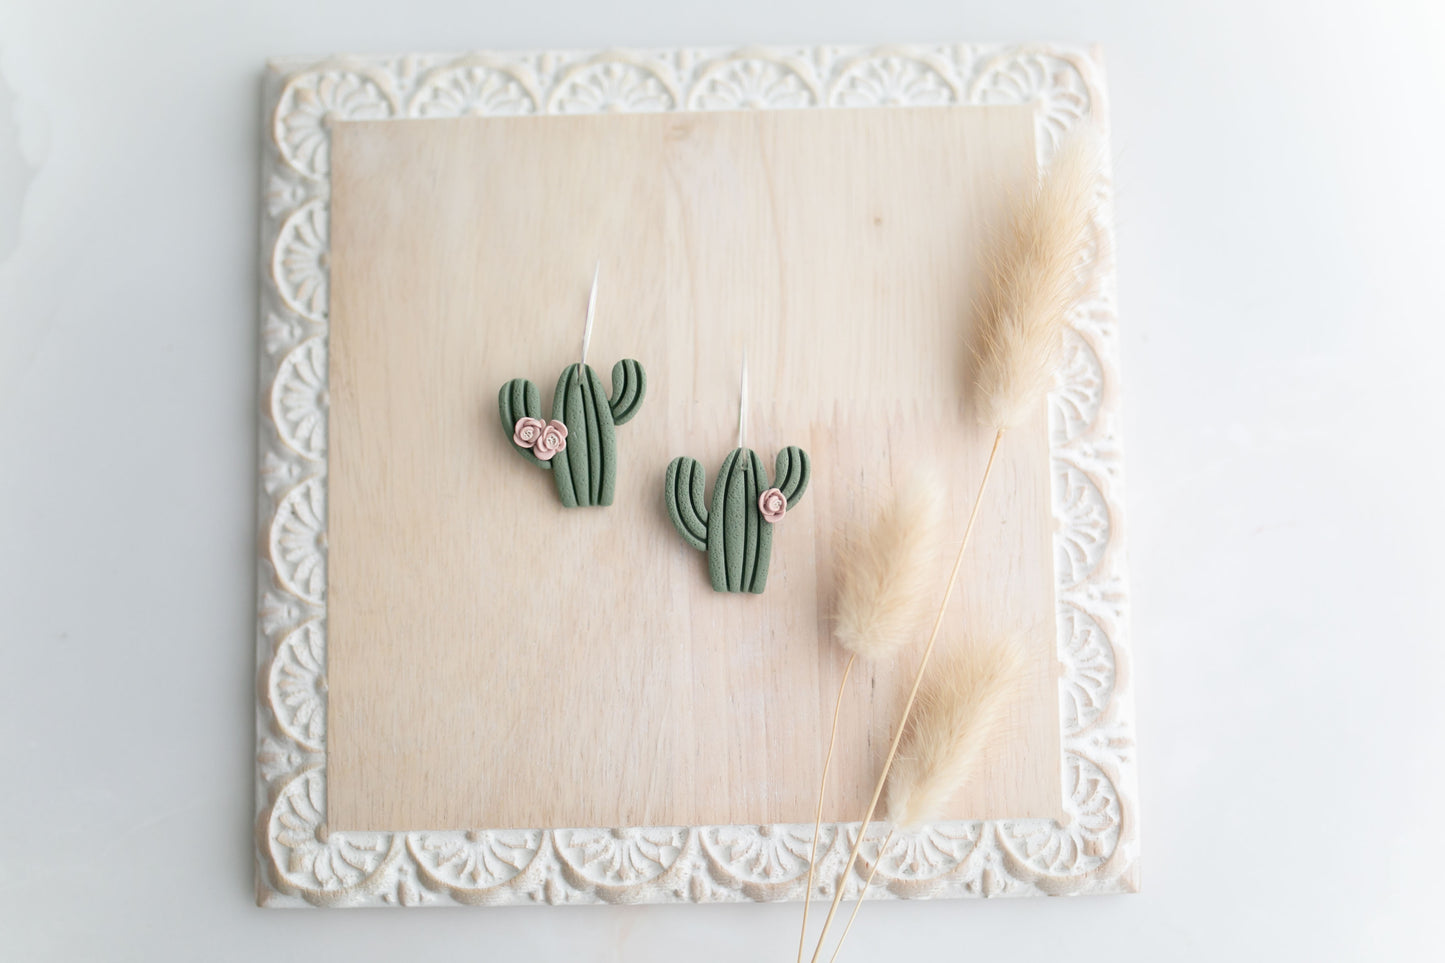 Clay earring | desert rose cactus | Southwest Collection